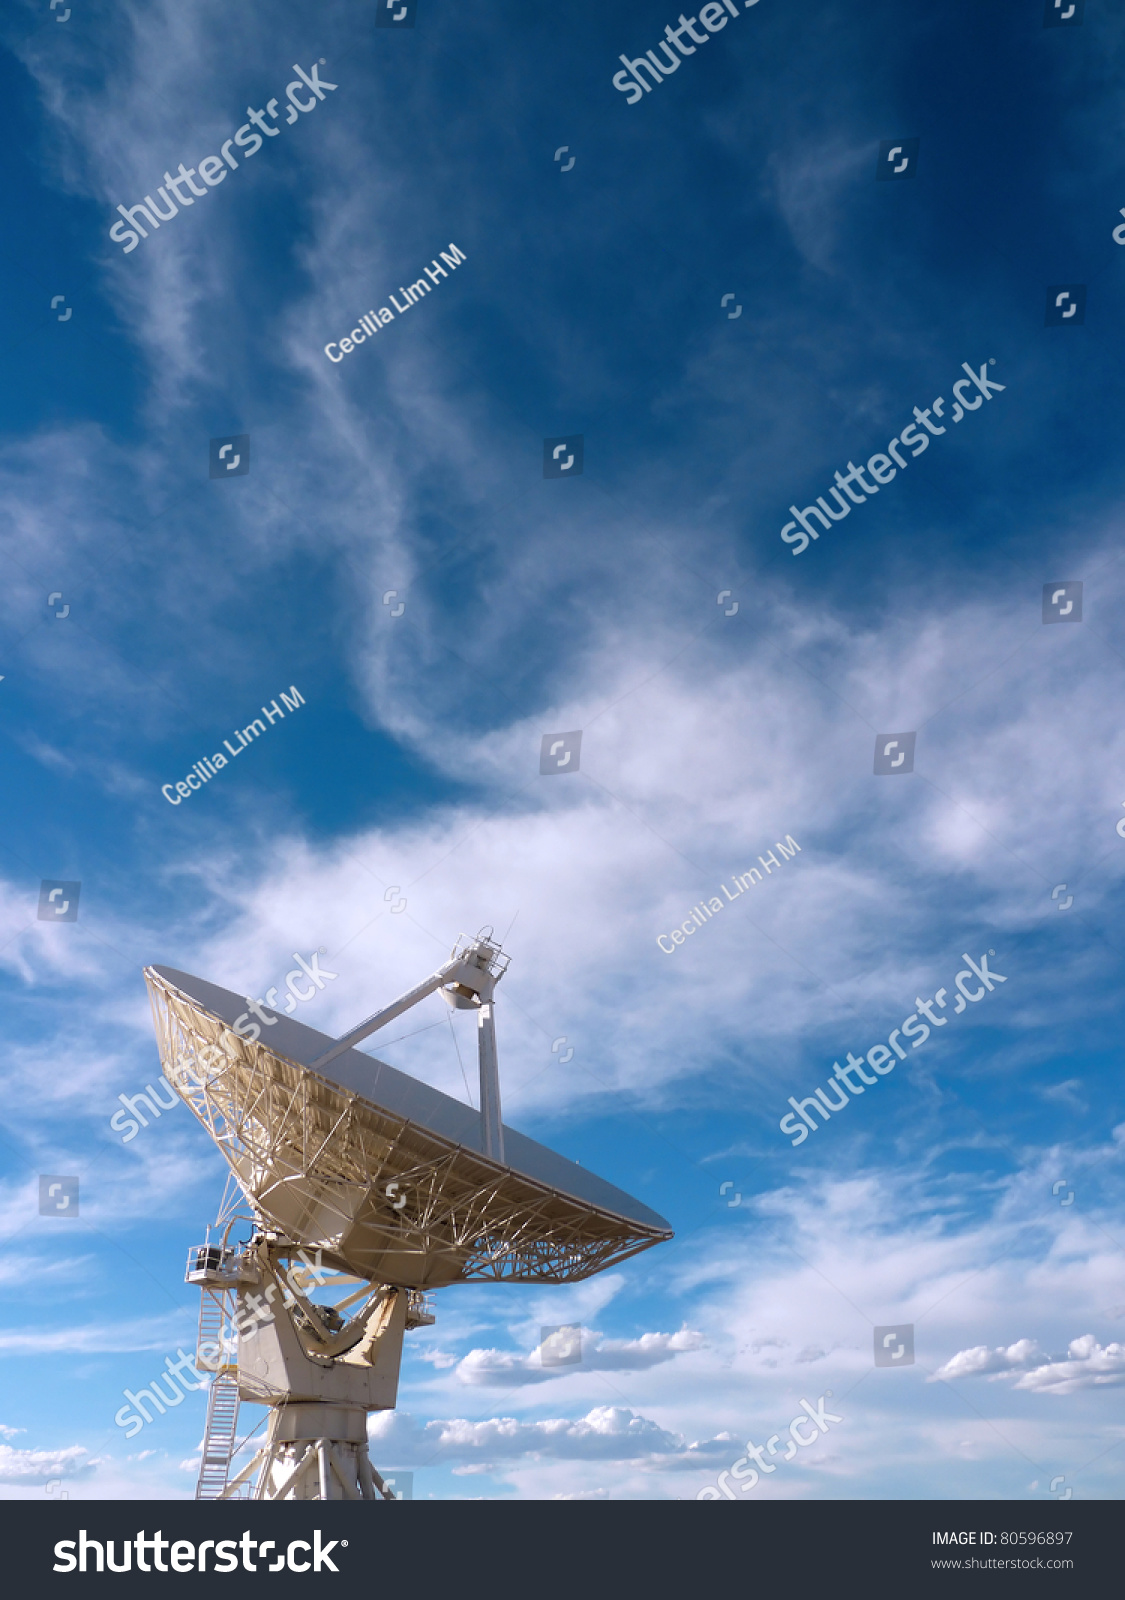 Radio telescope at the Very Large Array (VLA) in New Mexico, USA #80596897